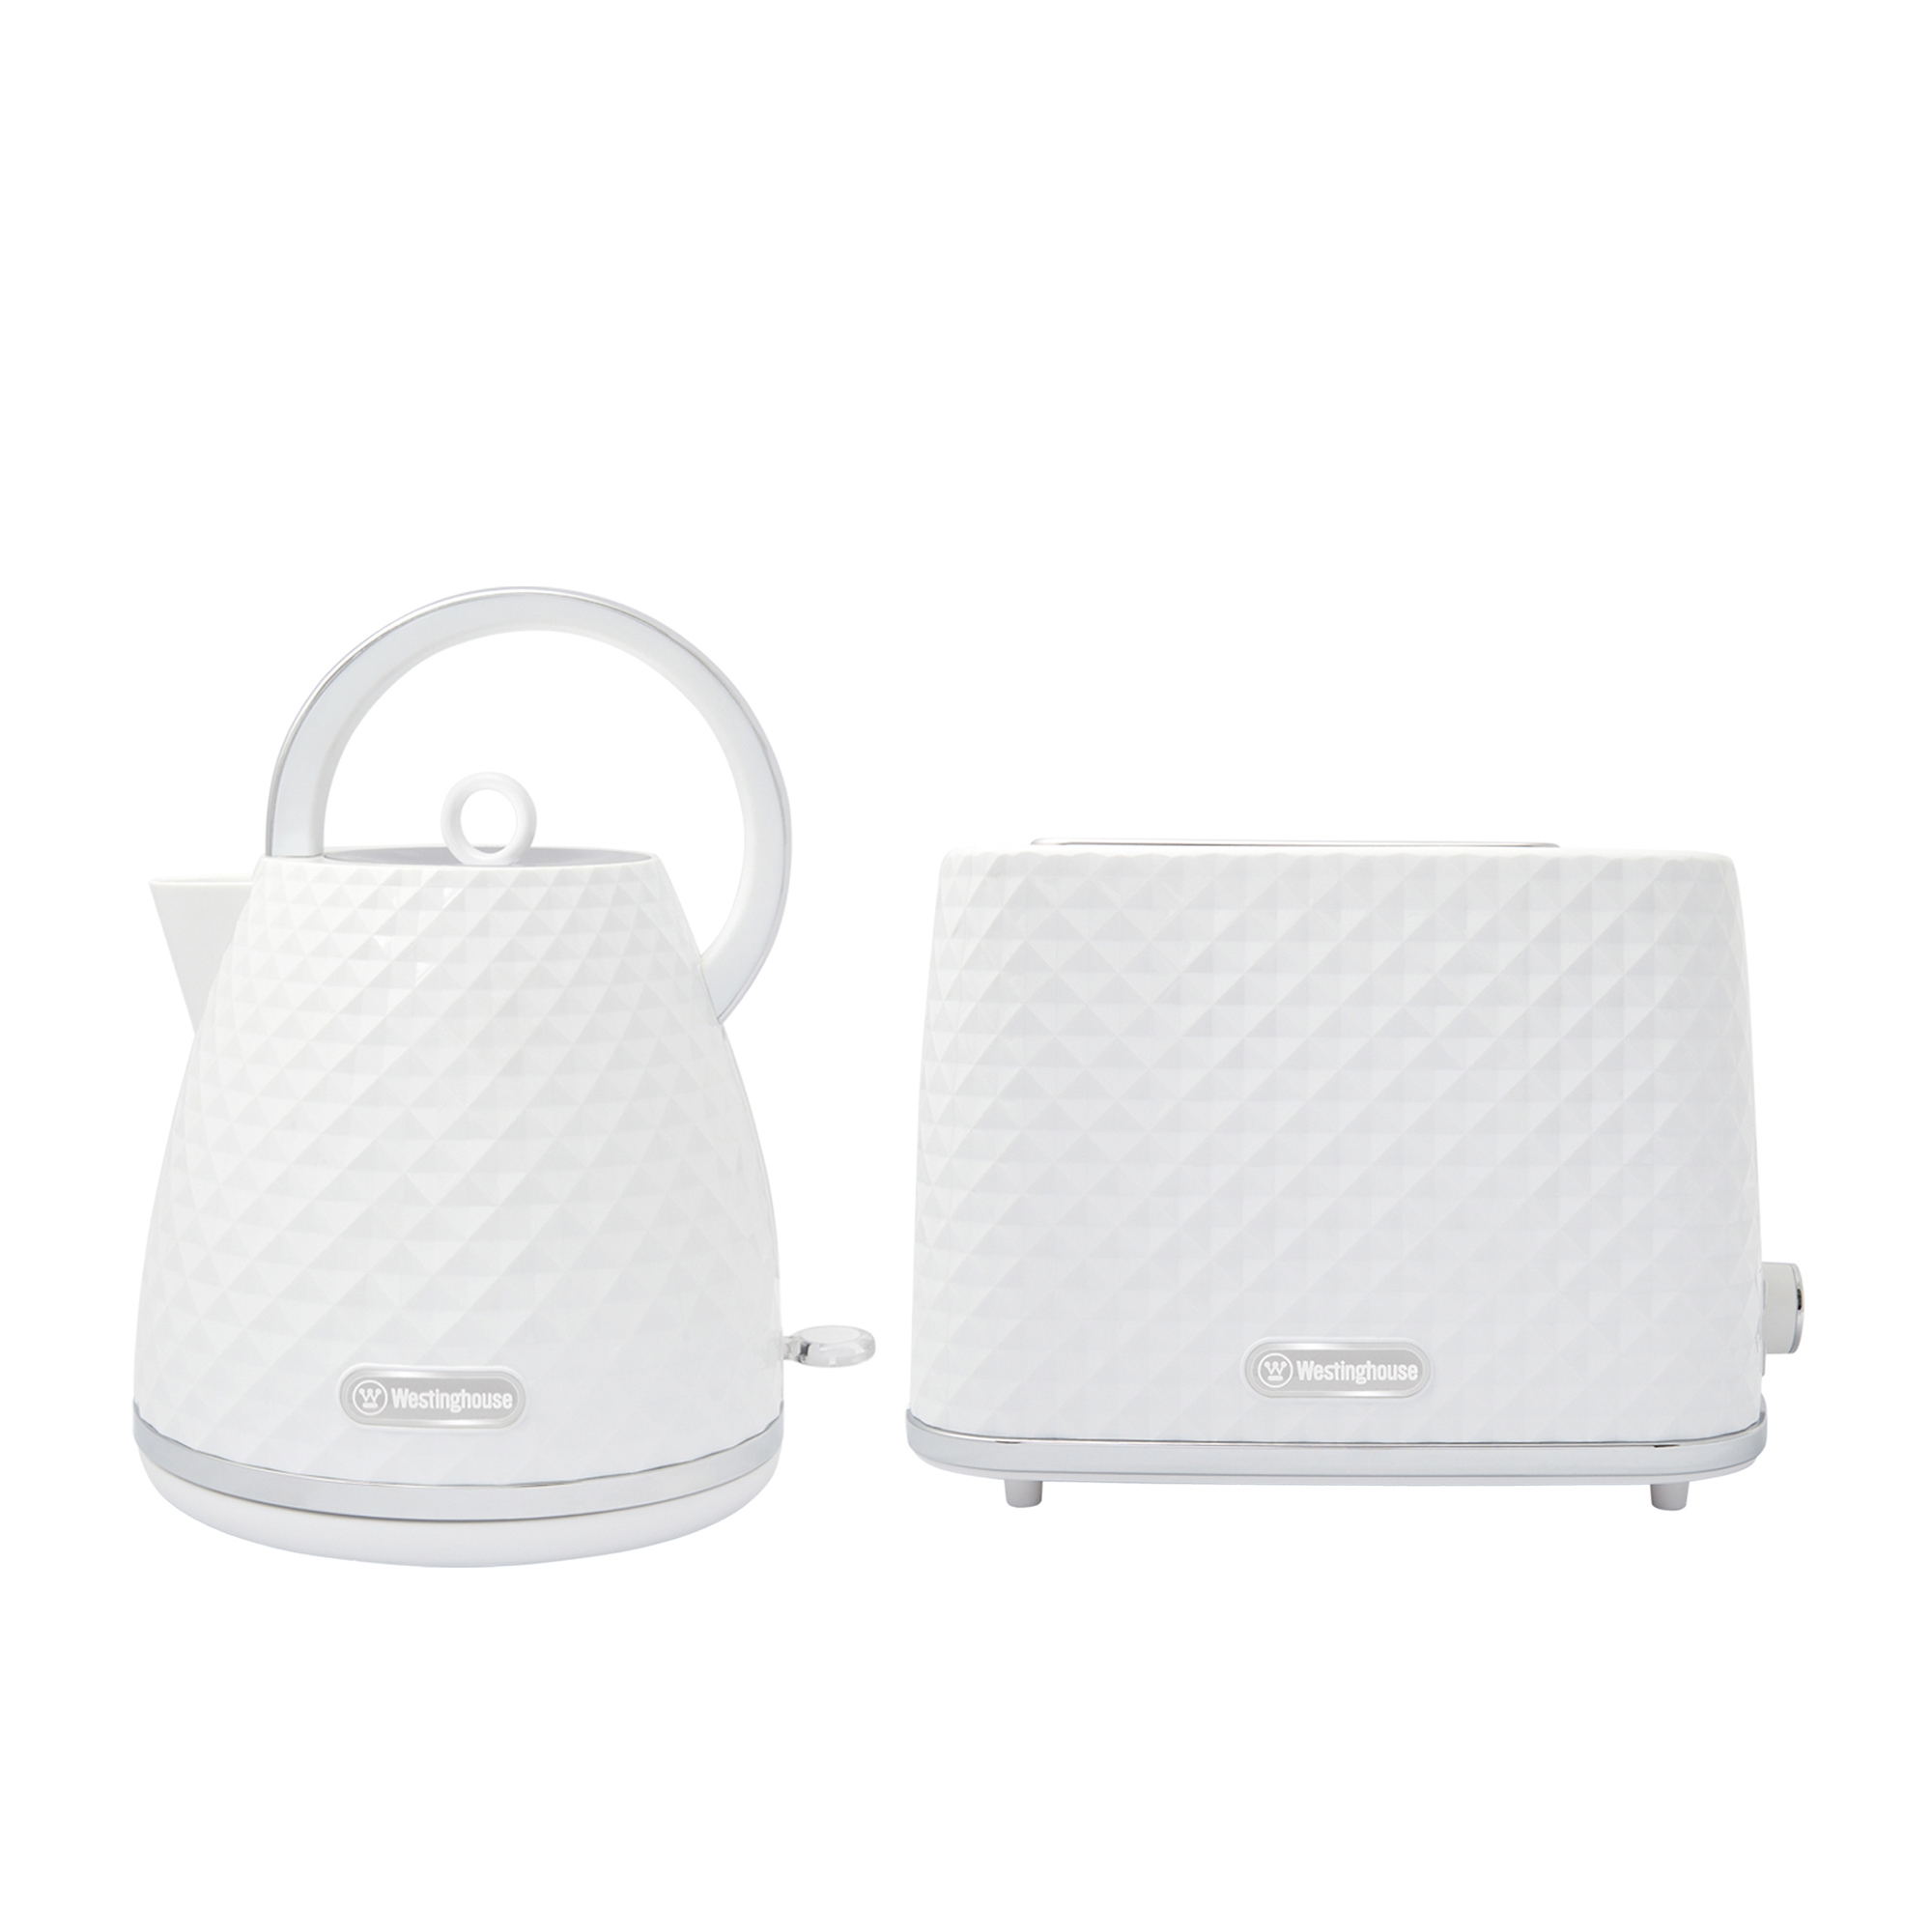 Westinghouse Kettle and Toaster Pack White - Diamond Pattern Image 1